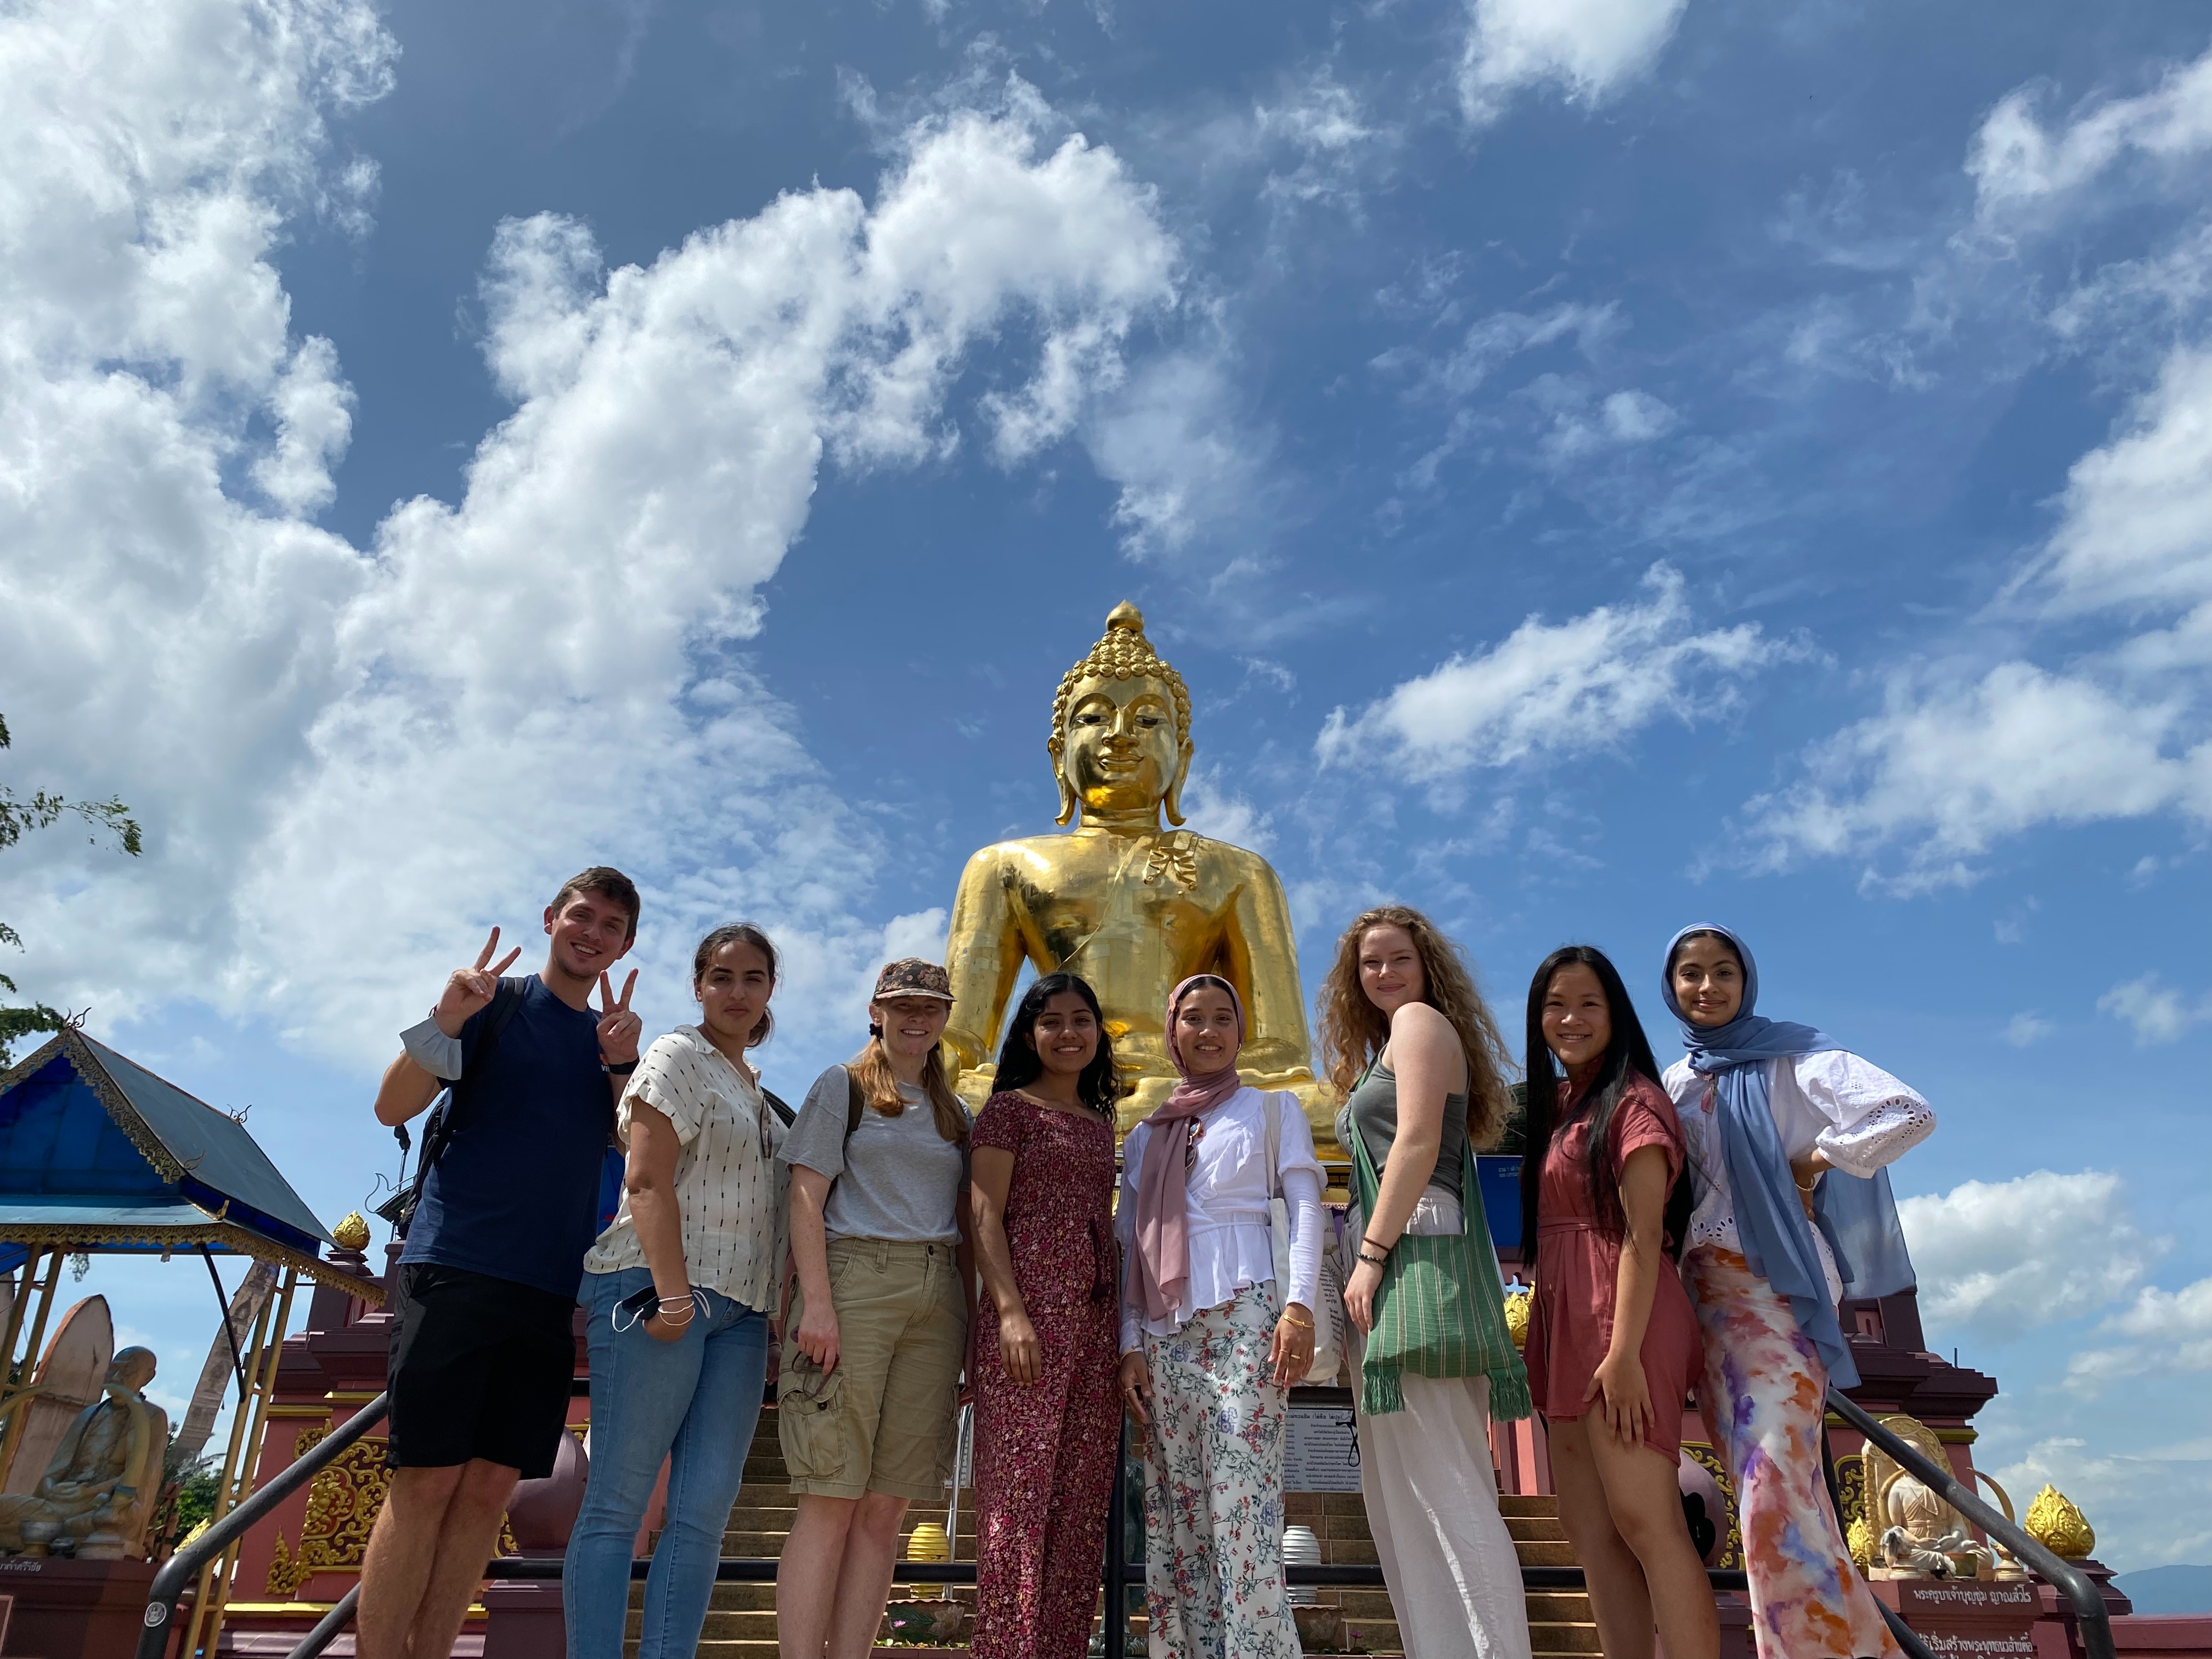 Eight students stand together in front of golden statue in Thailand